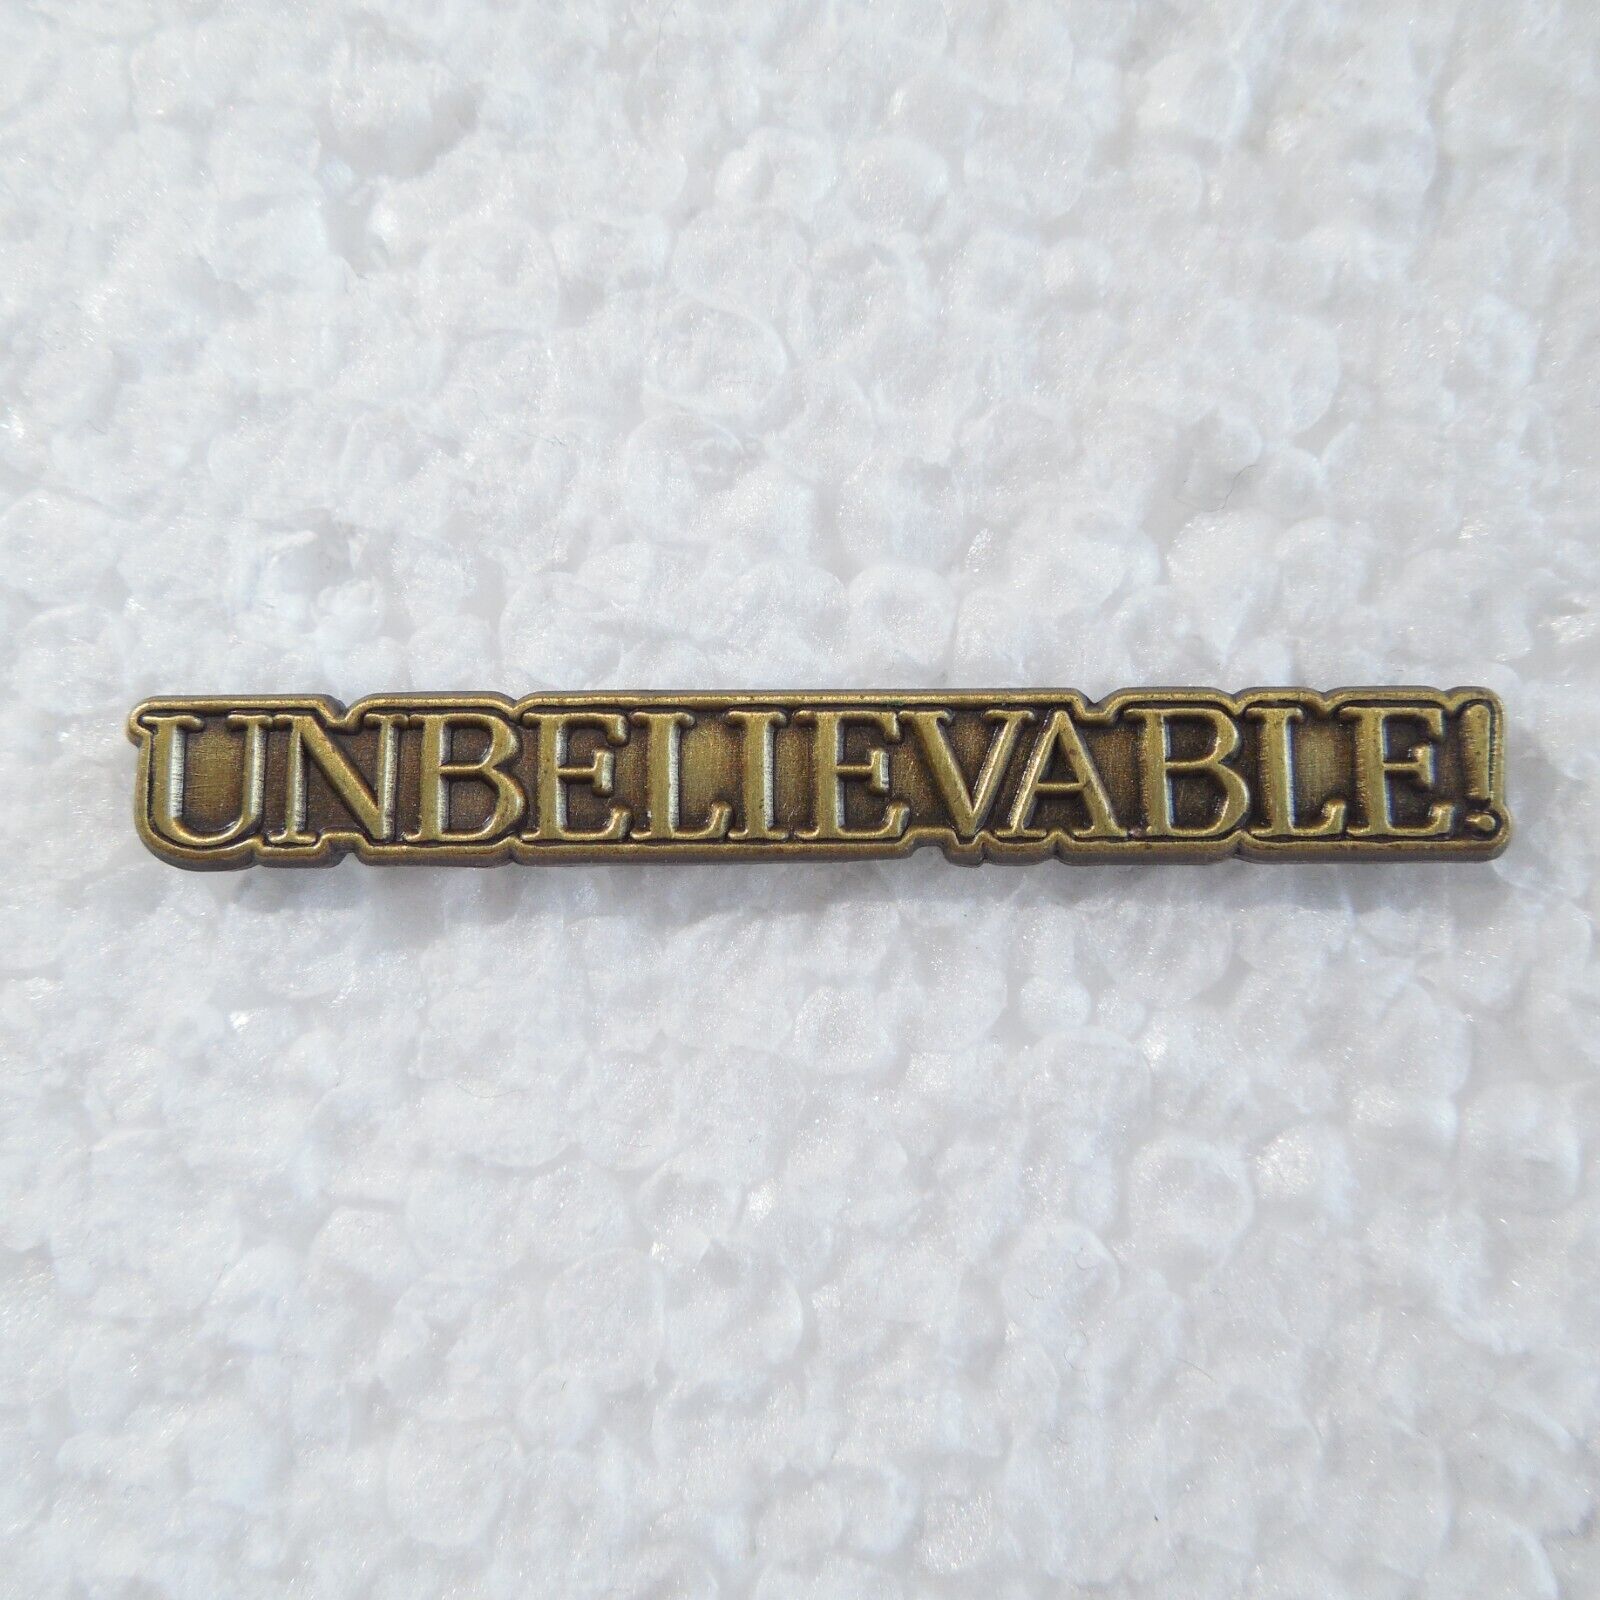 UNBELIEVABLE word text Metal Lapel Bag Hat Pin Pinback Brooch Collectible